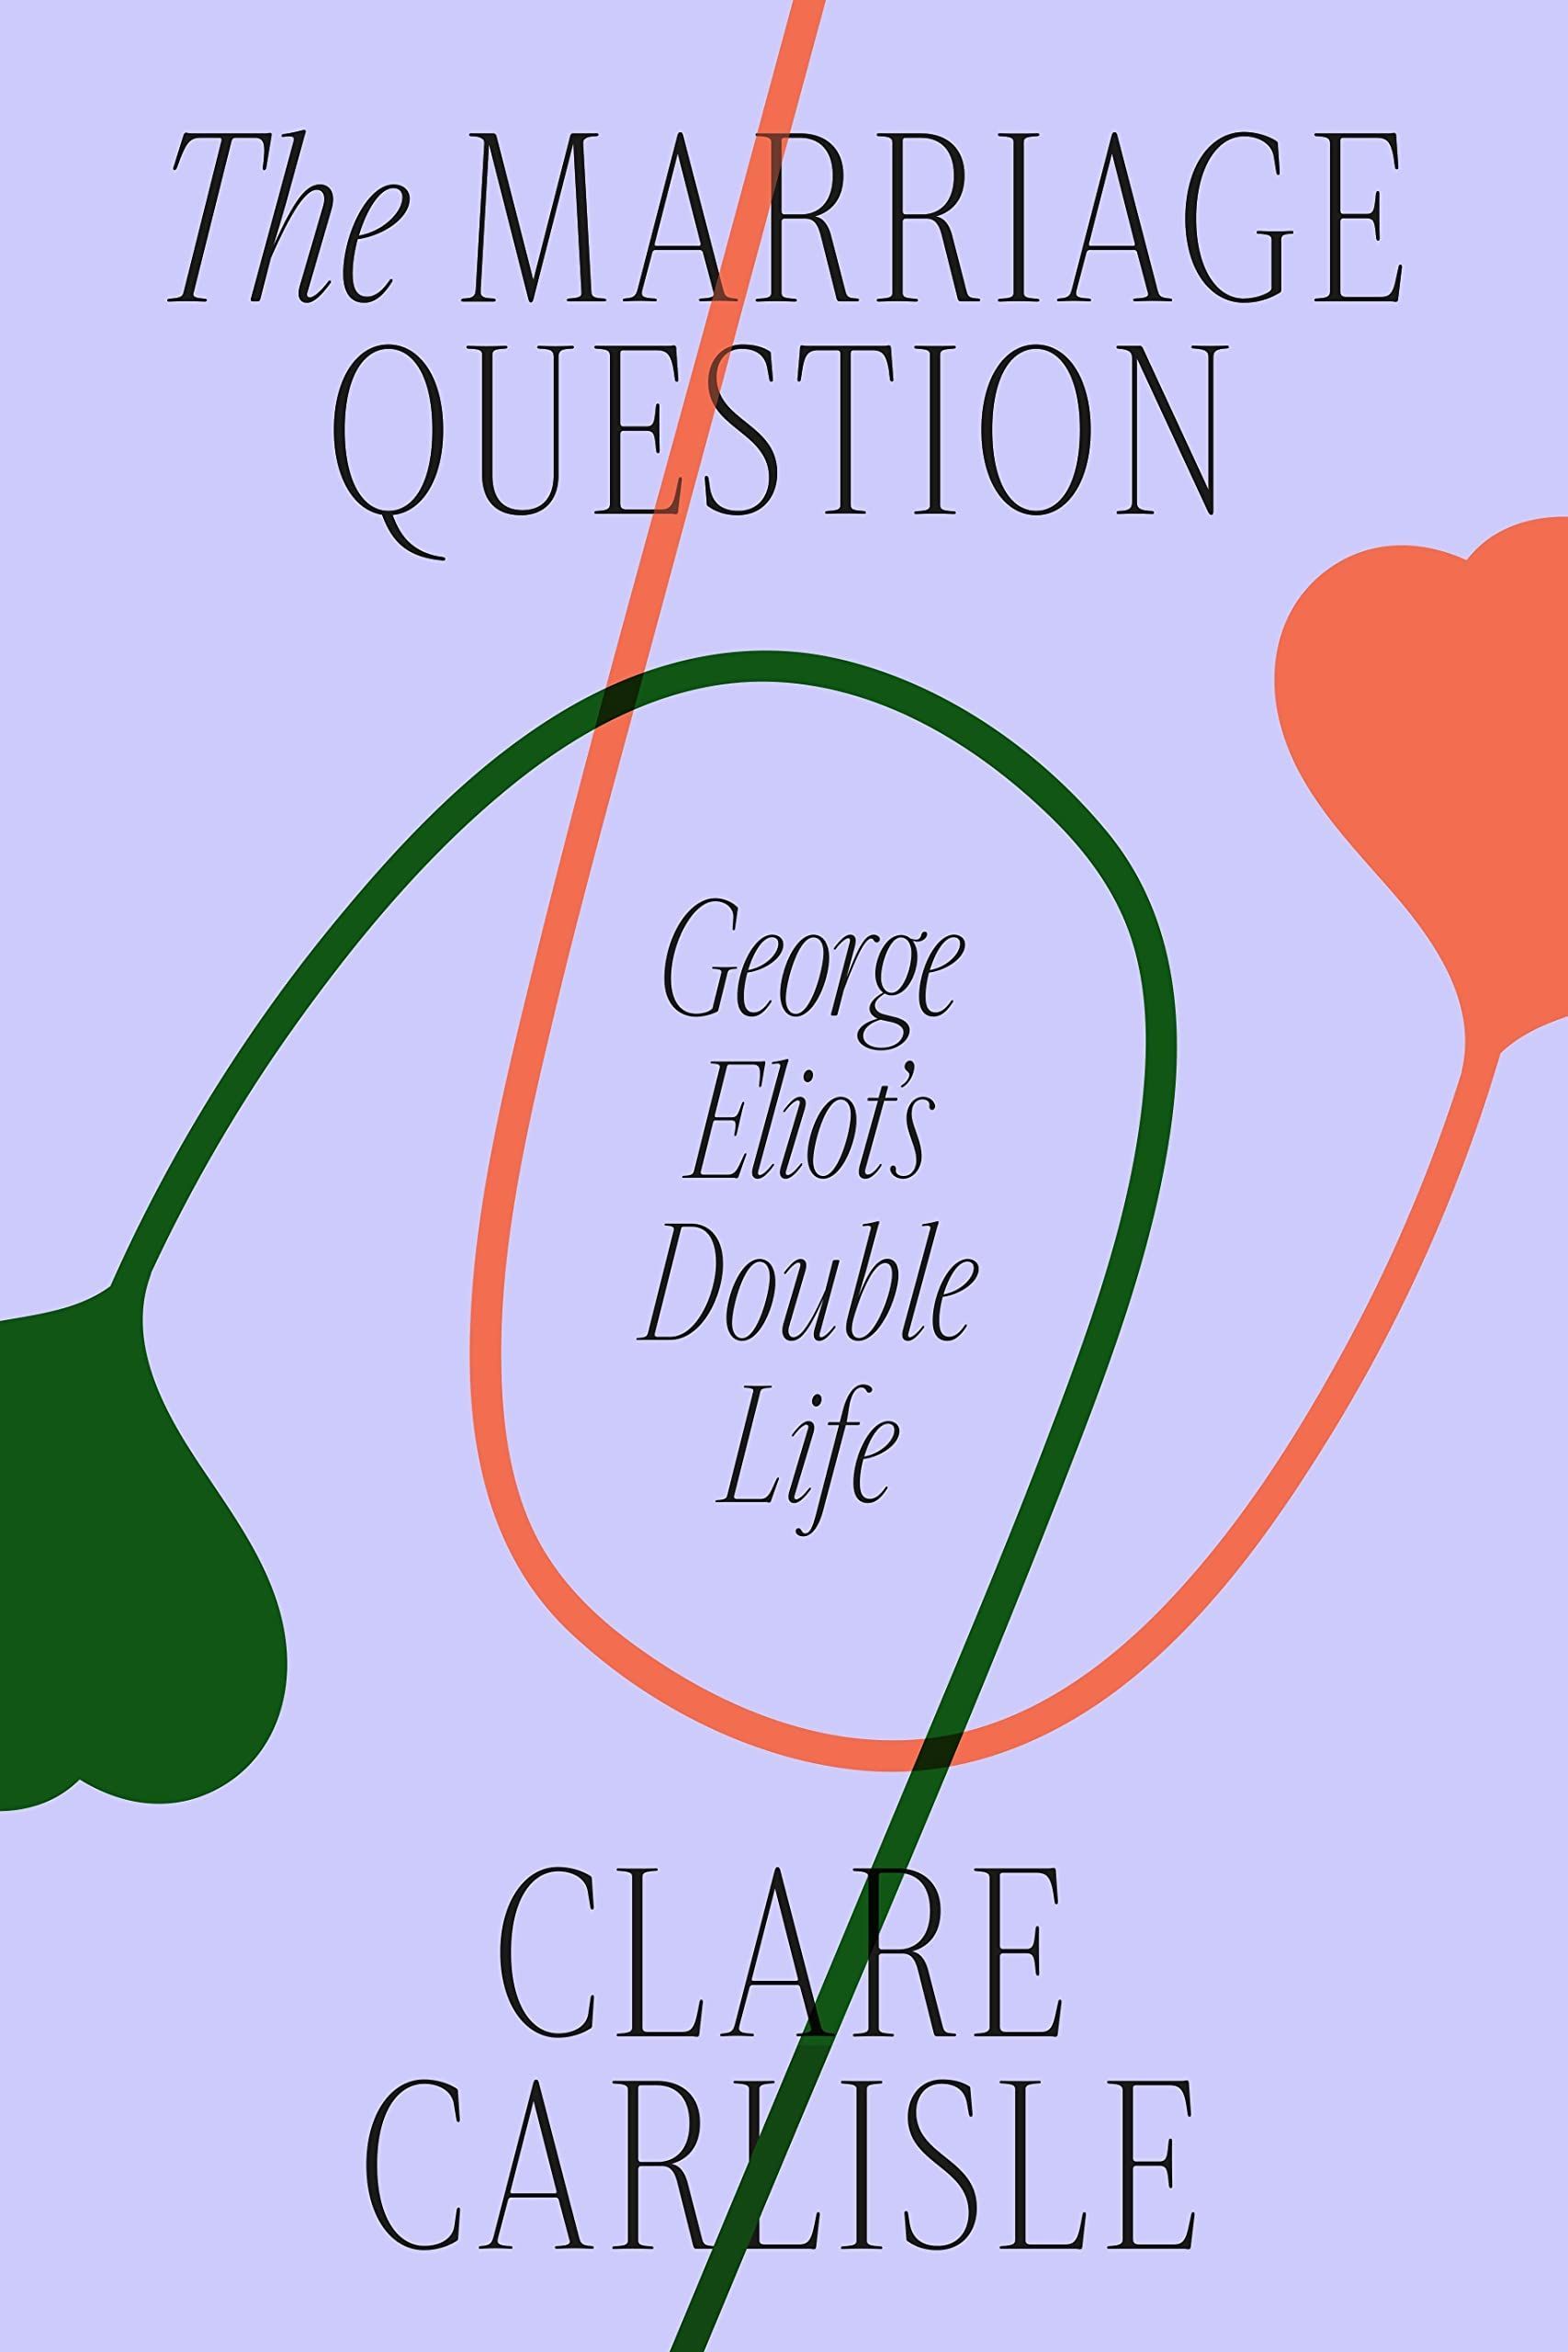 The World’s Wife: On Clare Carlisle’s “The Marriage Question”